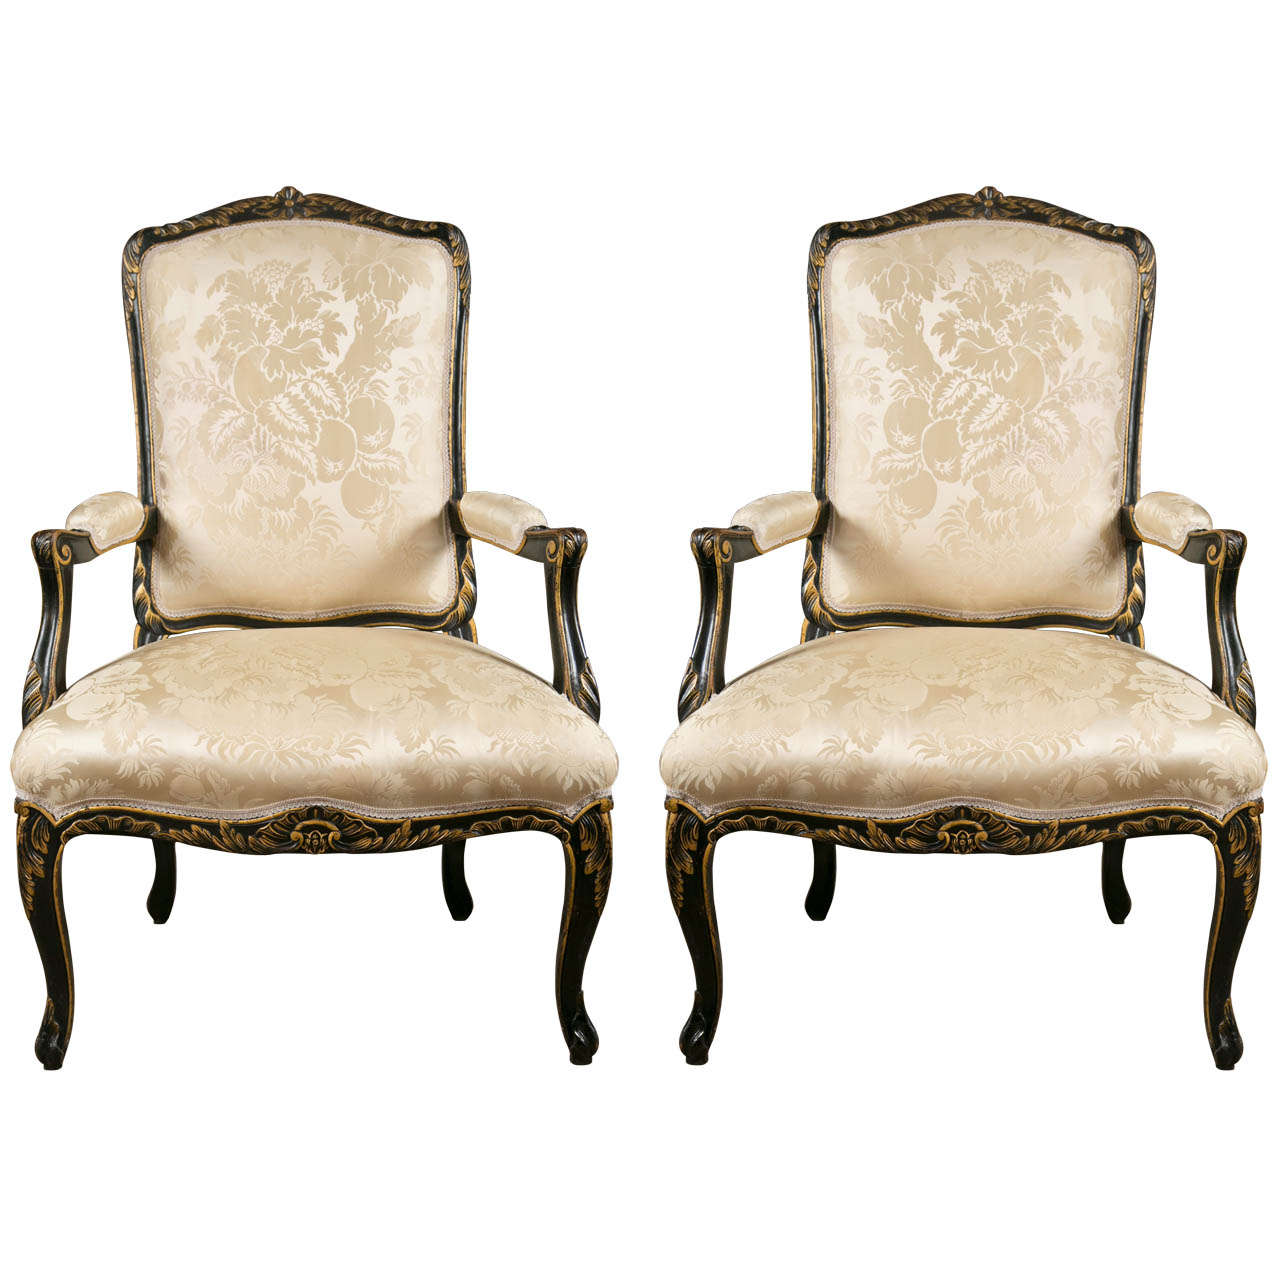 Pair of French Fauteuils Louis XV Style Armchairs Ebonized And Parcel Gilt